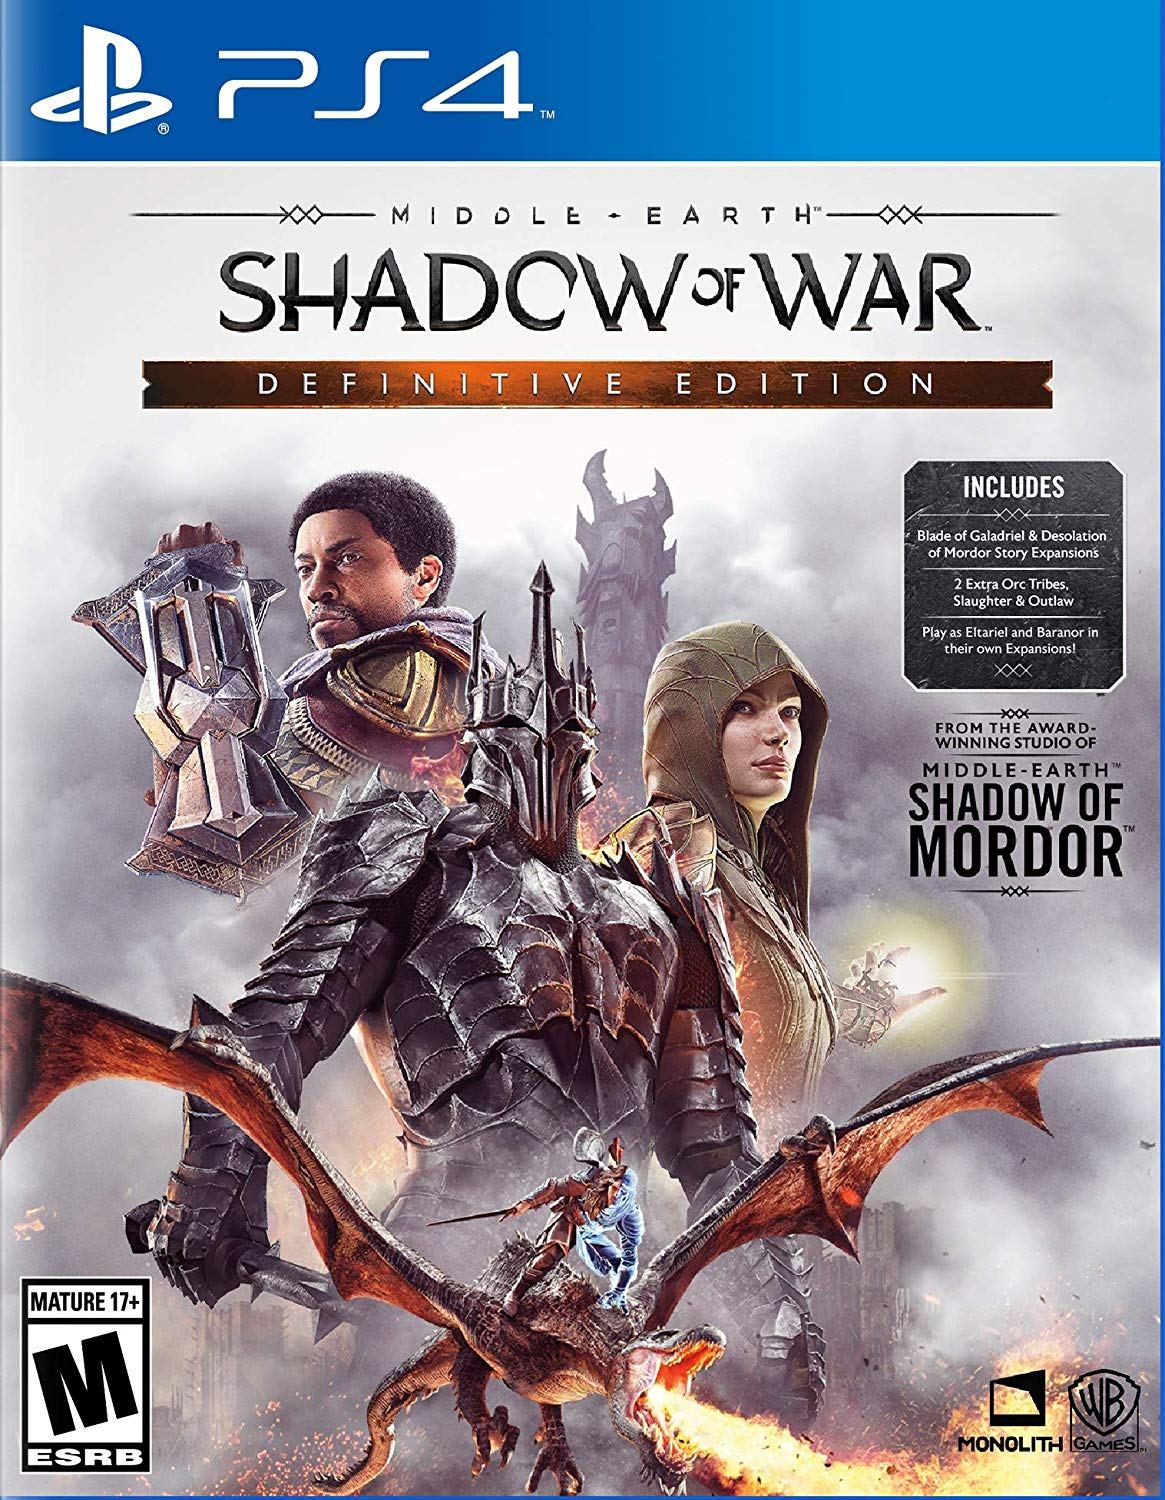 Middle Earth Shadow Of War Definitive Edition Spanish Cover